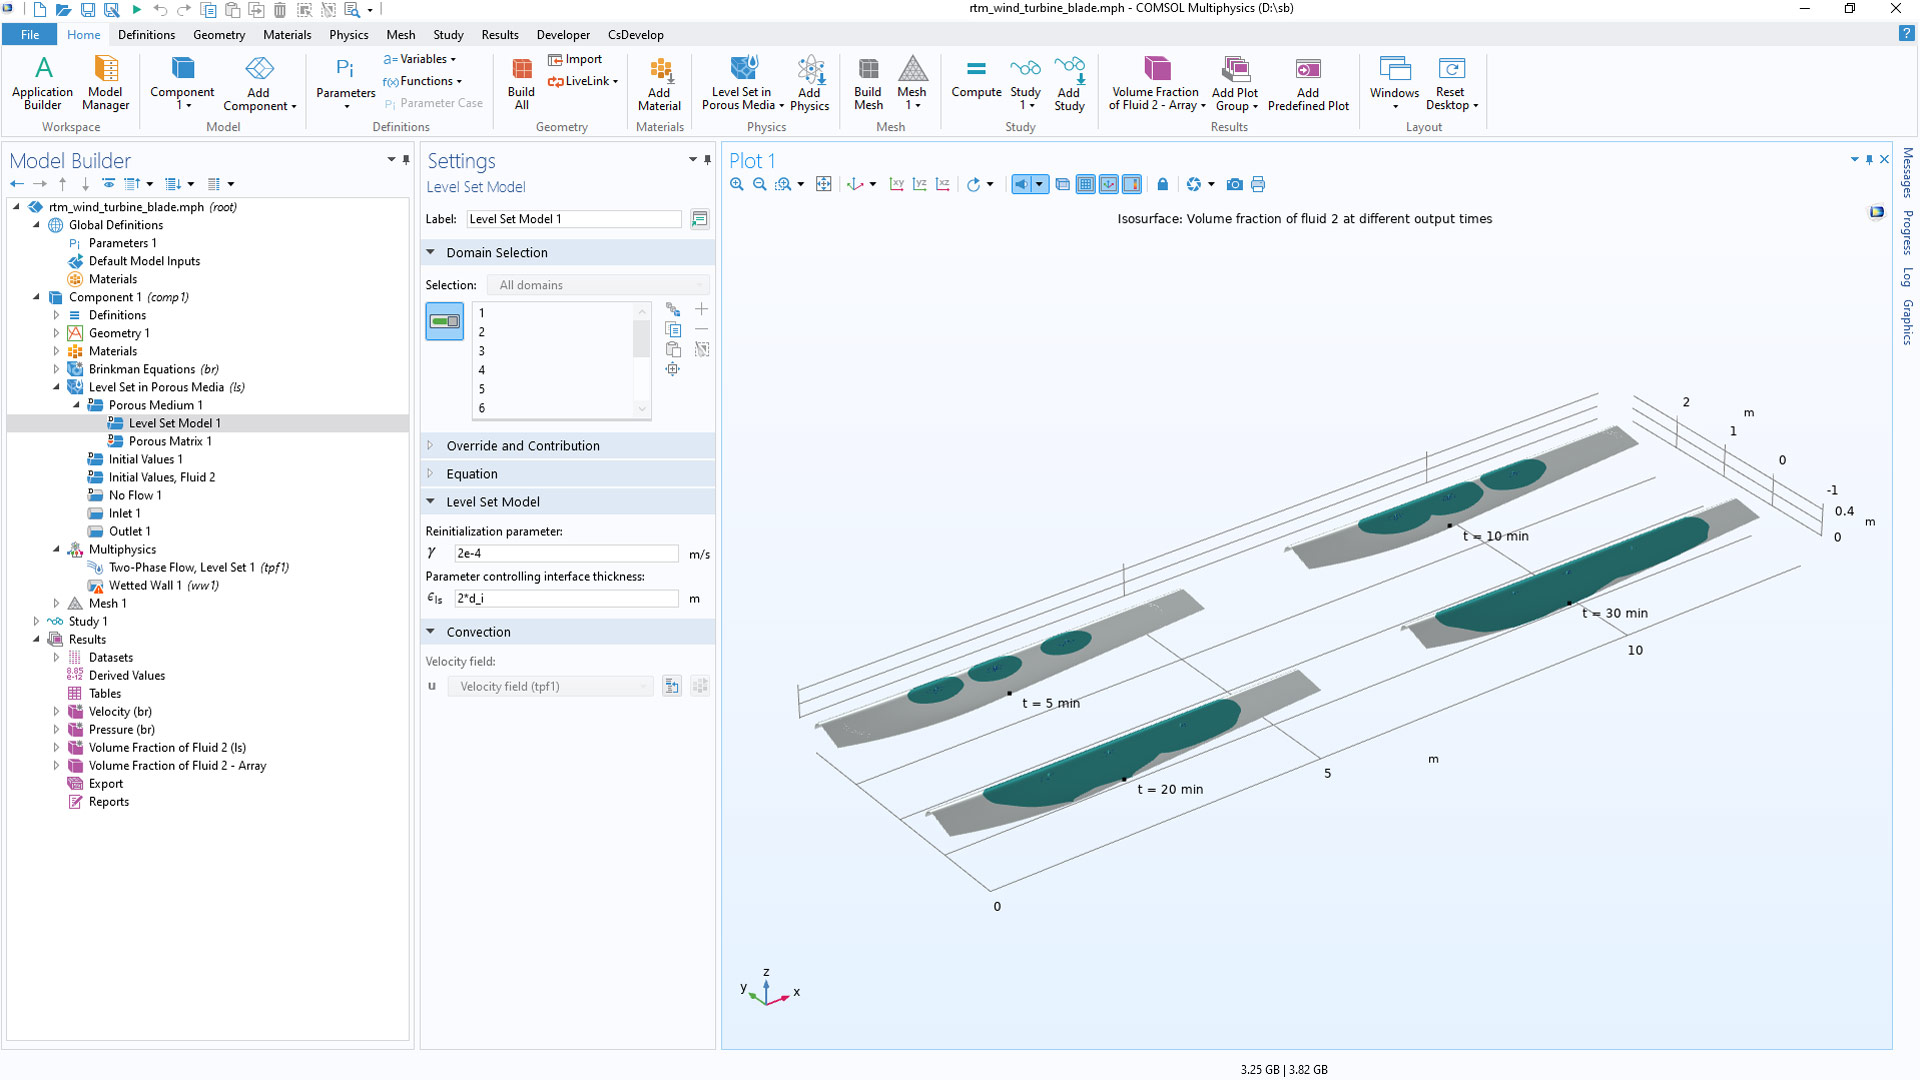 The COMSOL Multiphysics UI showing the Model Builder with the Level Set Model 1 subnode selected, the corresponding Settings window, and the Graphics window showing the Resin Transfer Molding of a Wind Turbine Blade model.